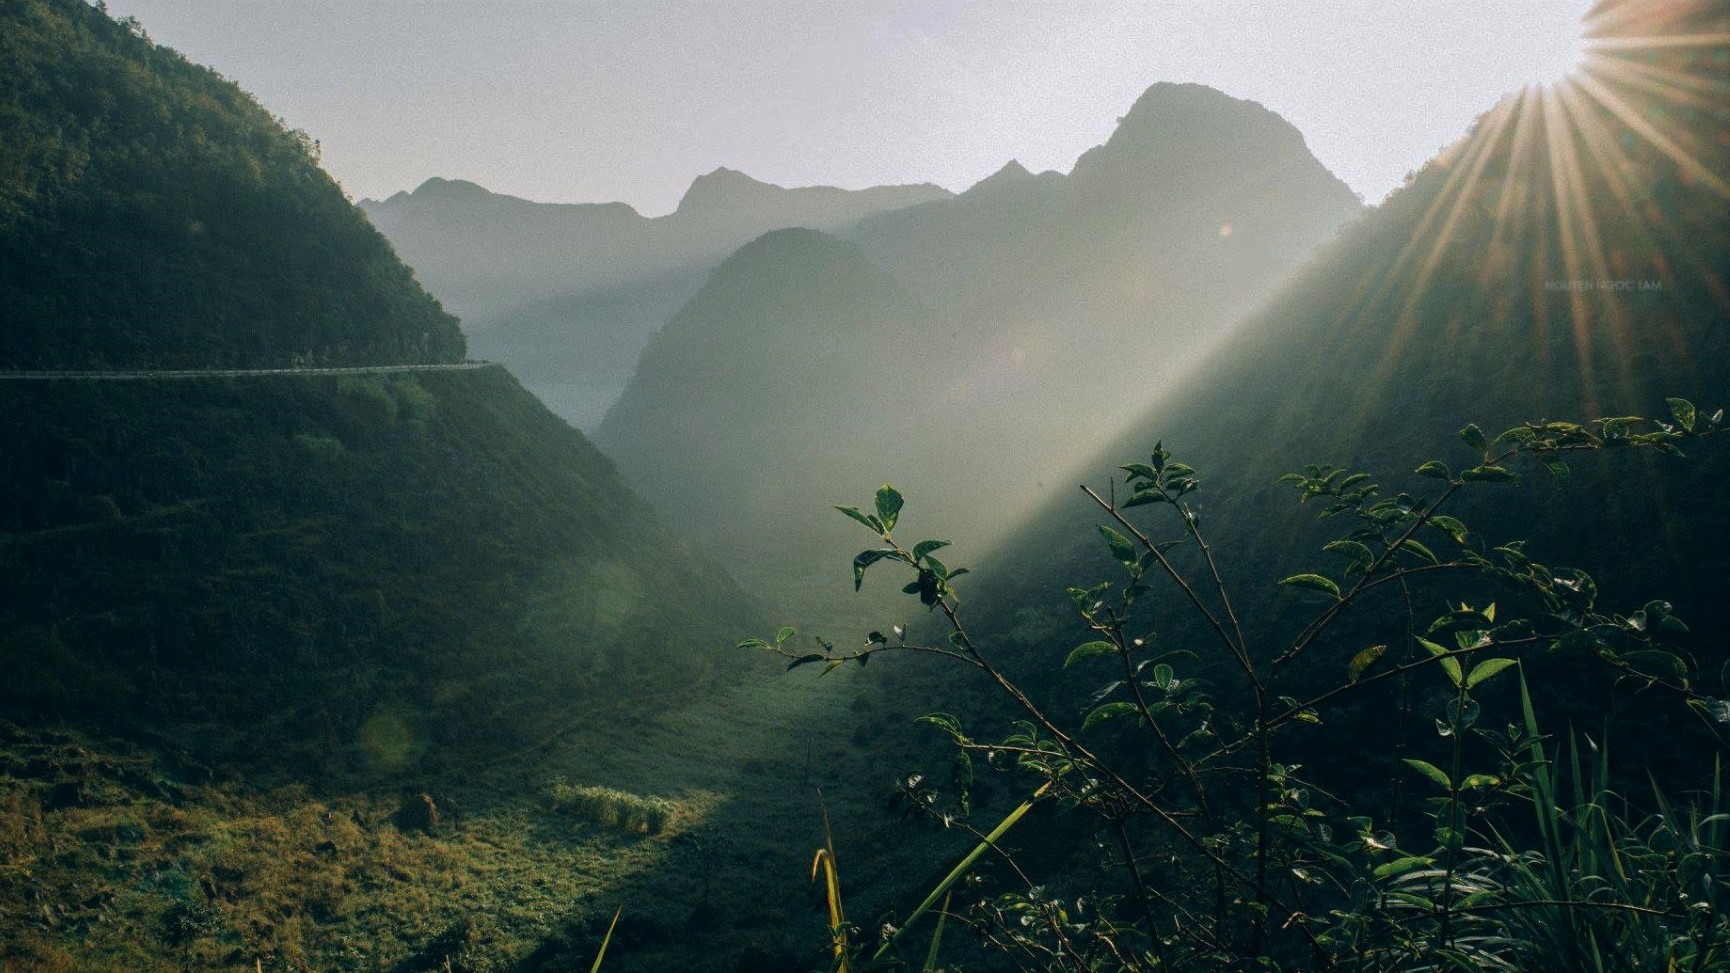 A JOURNEY OF HAPPINESS - HA GIANG